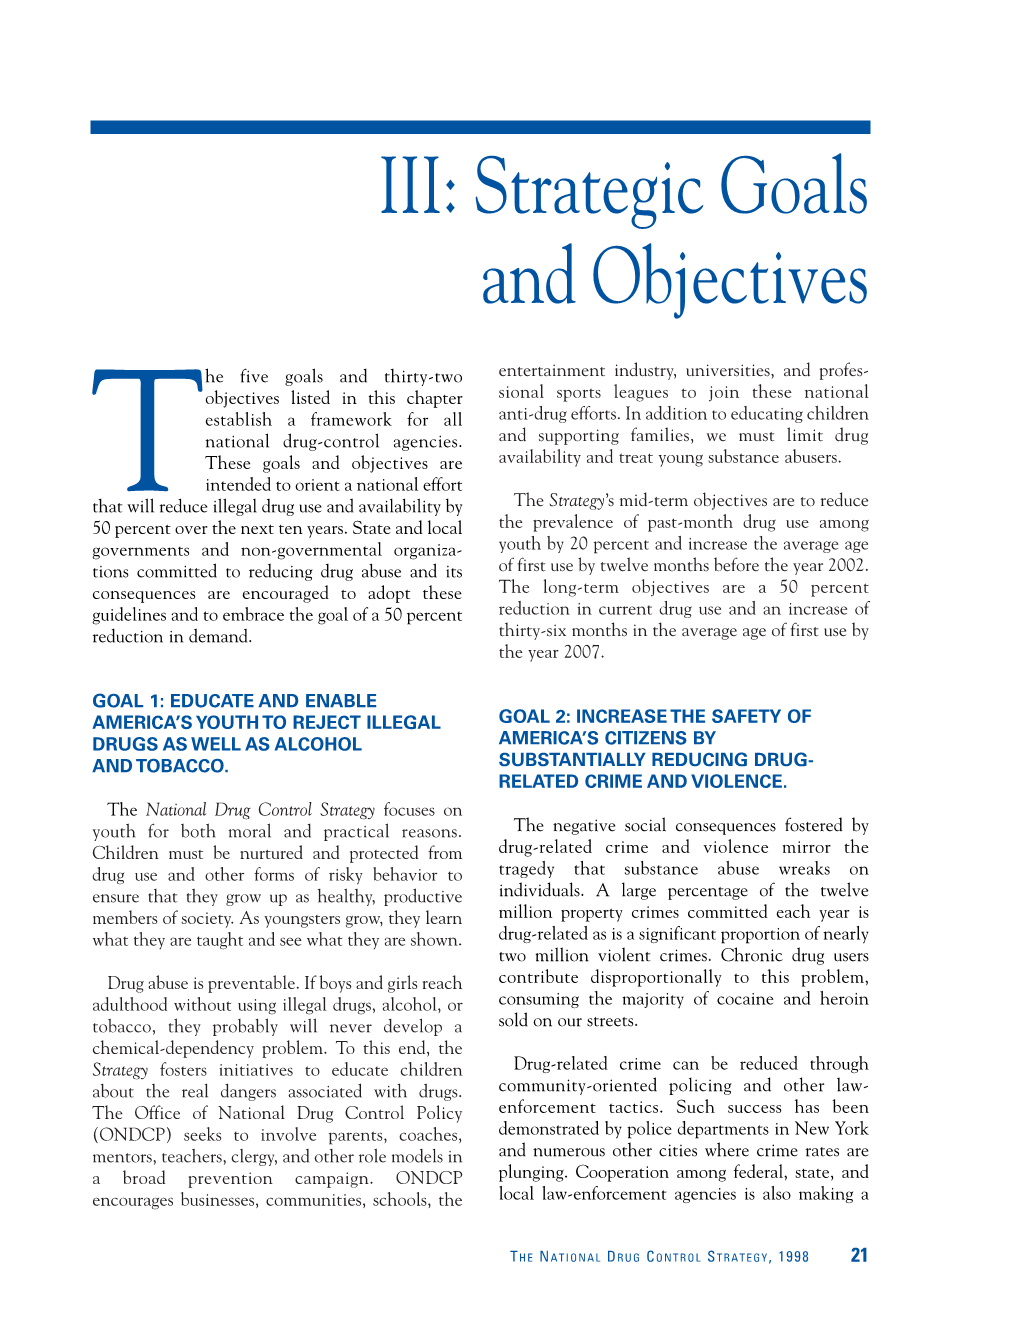 Strategic Goals and Objectives